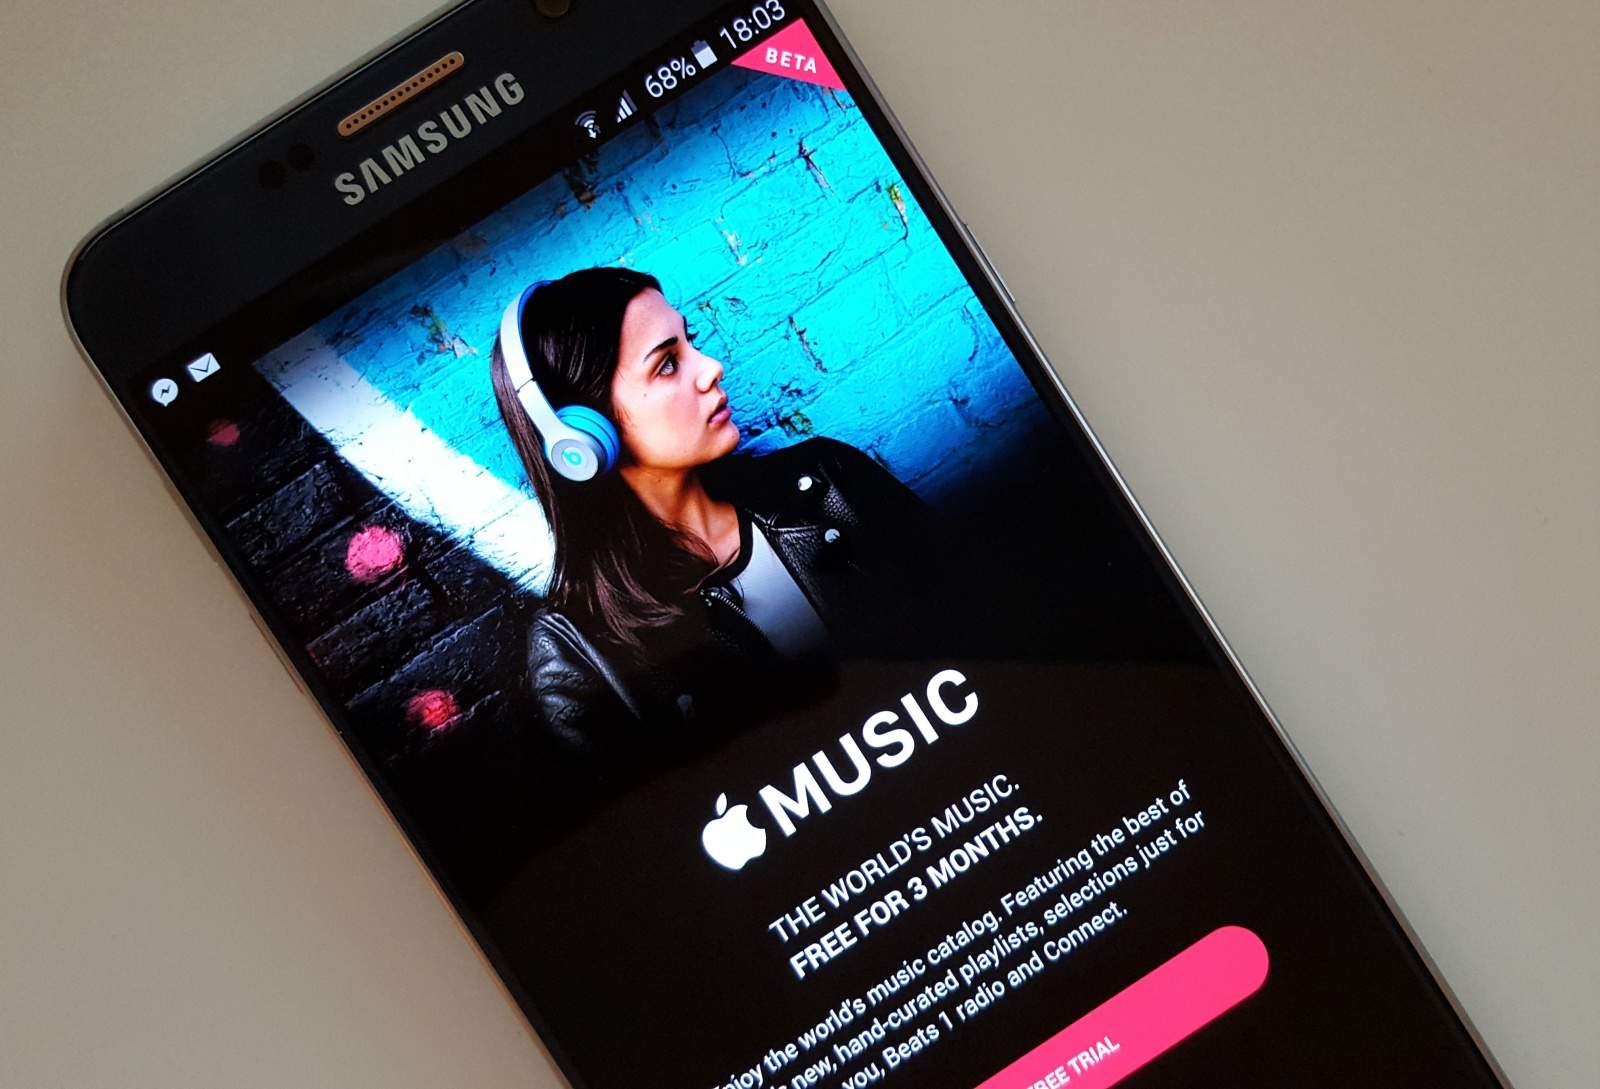 Apple Music on Android now supports music videos and family membership. Photo: Killian Bell/Cult of Android